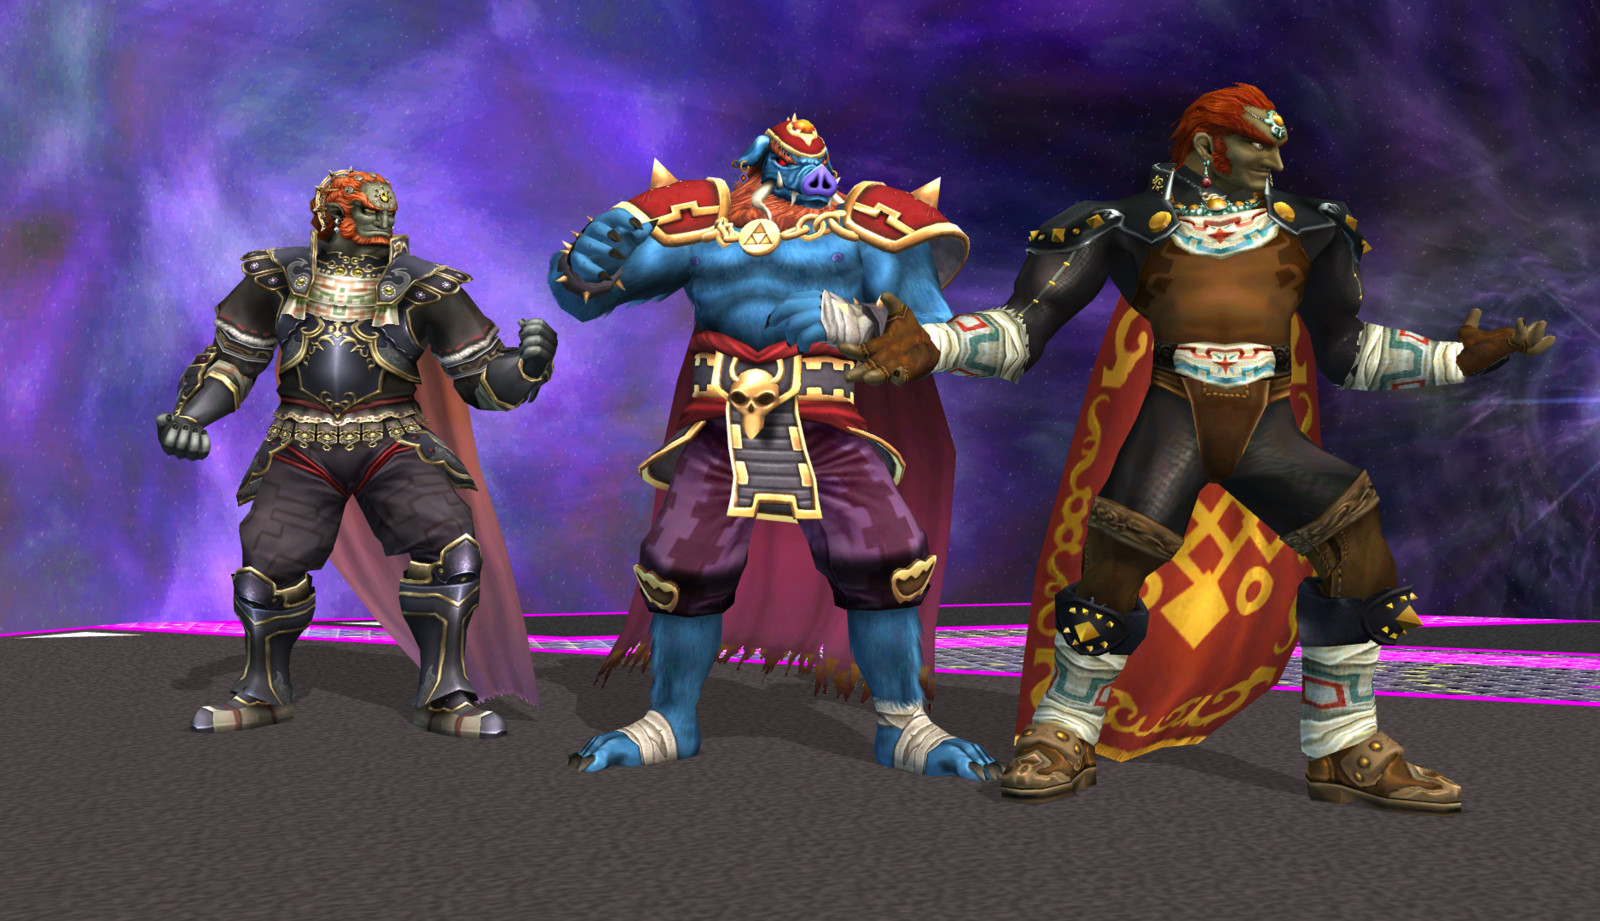 Pig Ganon standing with the two other Ganon's